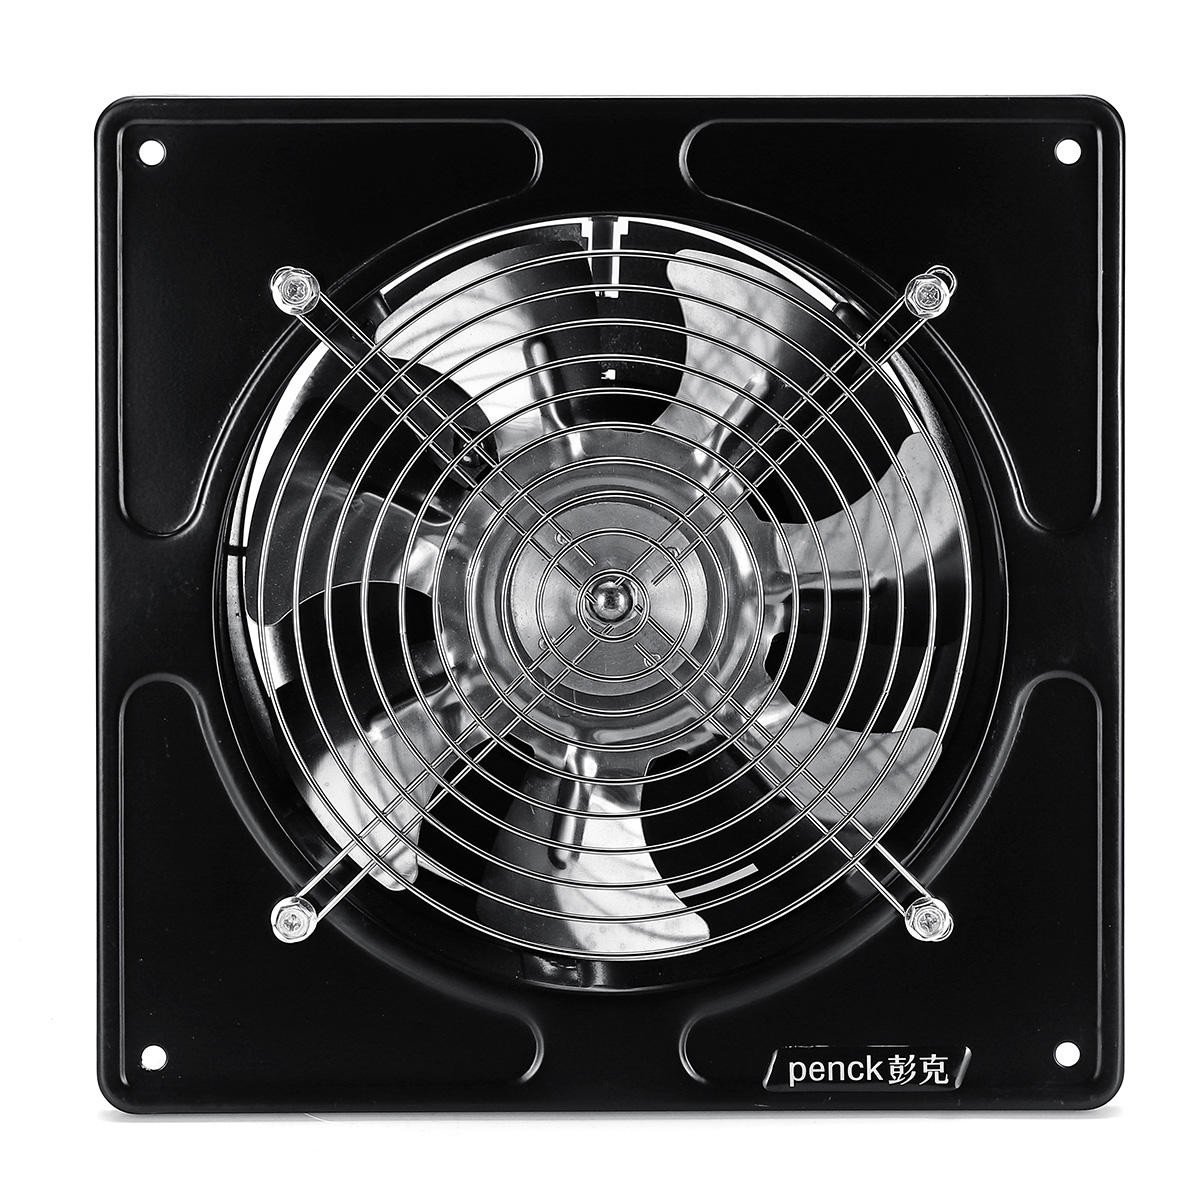 Silent Fan for Bedroom Awesome 8 Inch 80w Extractor Fan Silent Wall Extractor Industrial Ventilation Fan toilet Bathroom Air Blower